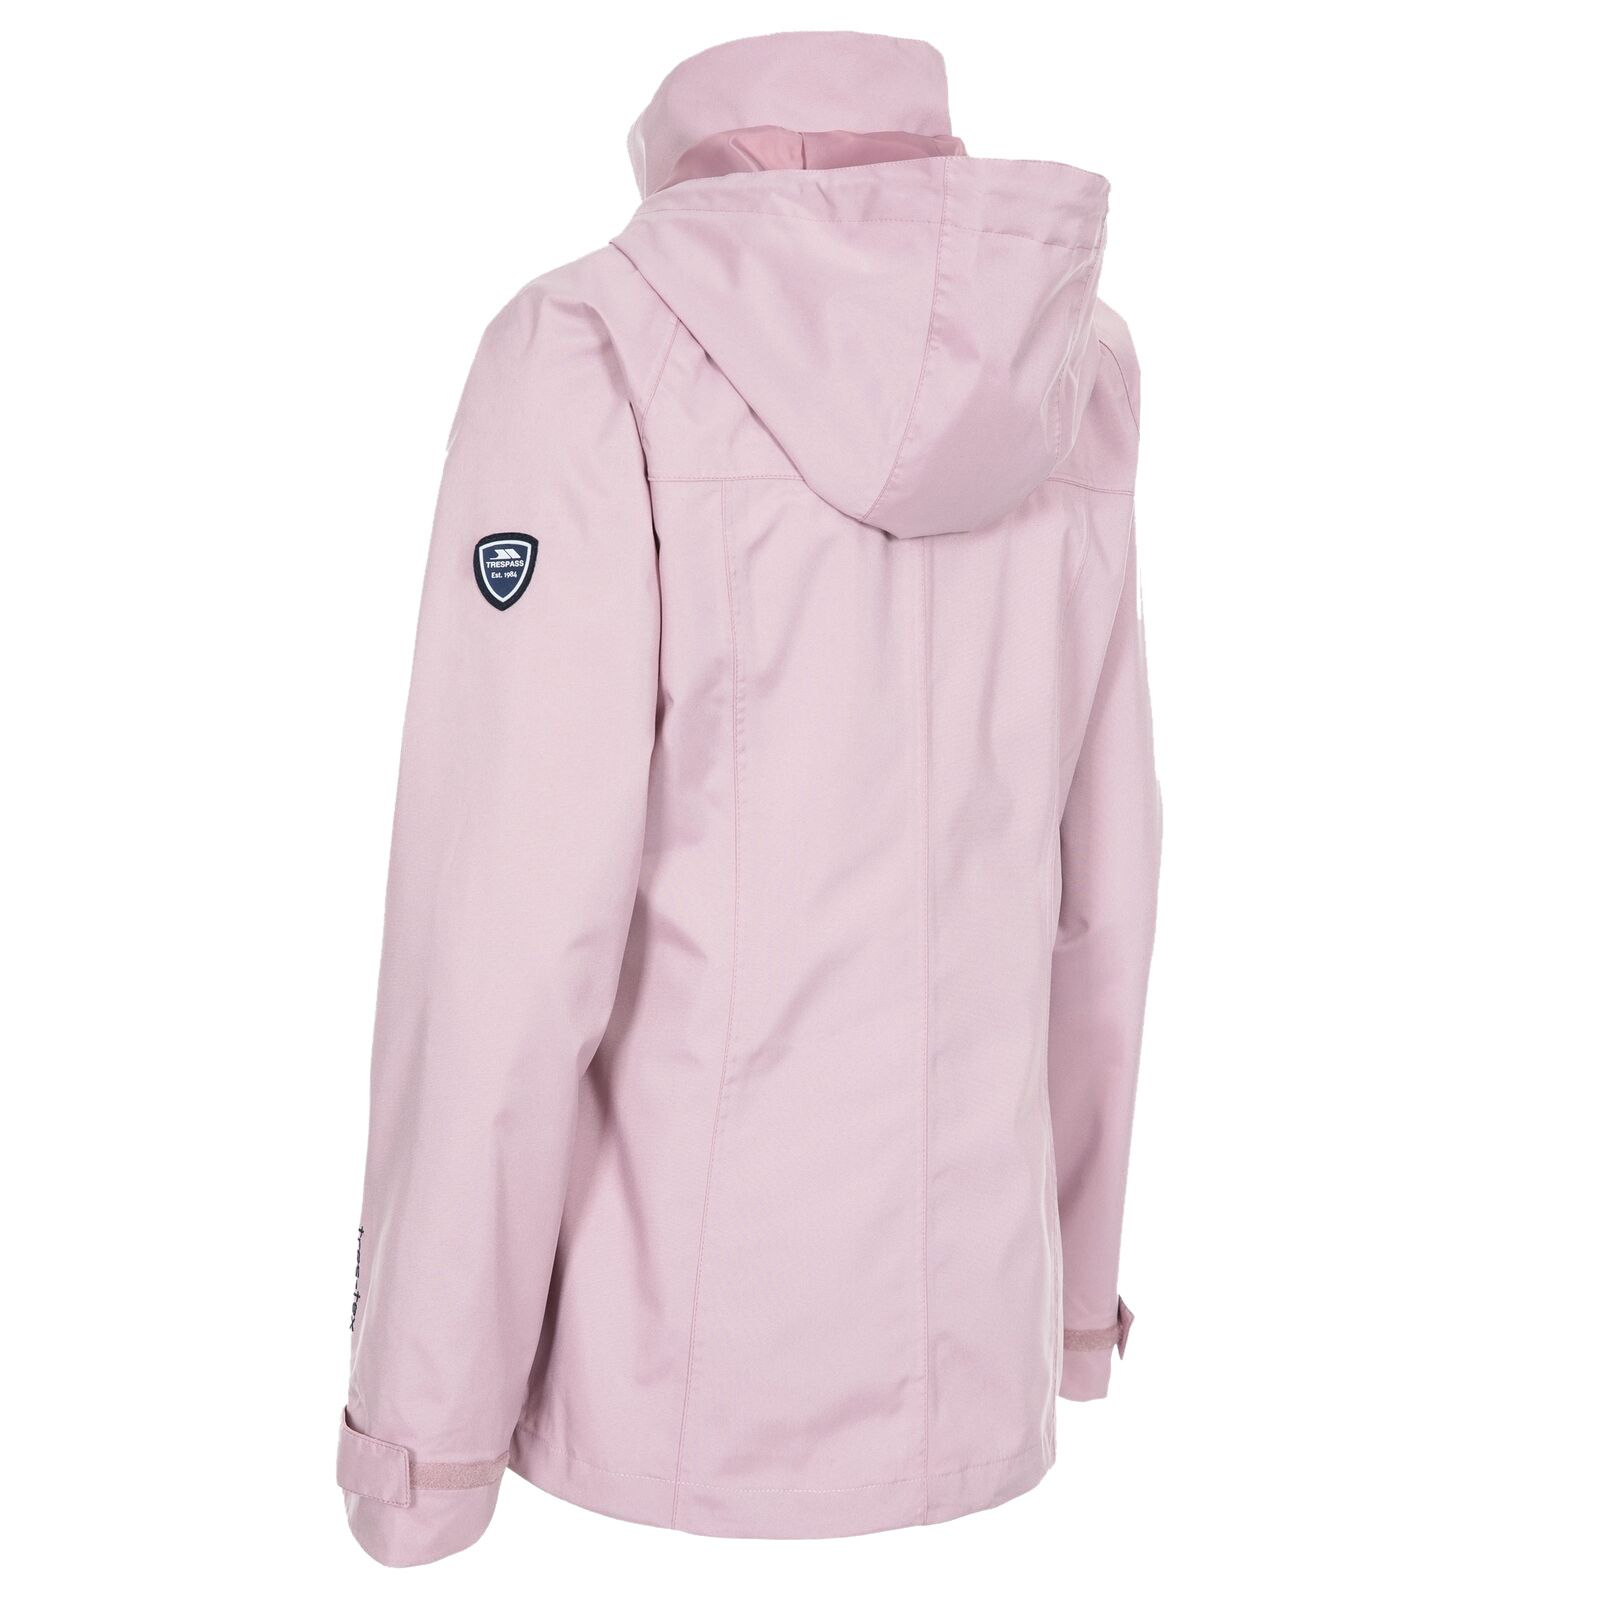 Material: 100% Polyester. Fabric: Taffeta. Design: Logo, Plain. Adjustable Hem, Breathable, Storm Flap, Wind Resistant. Fabric Technology: Tres-Tex Membrane. Cuff: Adjustable. Neckline: High-Neck. Sleeve-Type: Long-Sleeved. Hood Features: Concealed, Drawstring. Pockets: 2 Envelope Pockets, 1 Chest Pocket. Fastening: Full Zip.